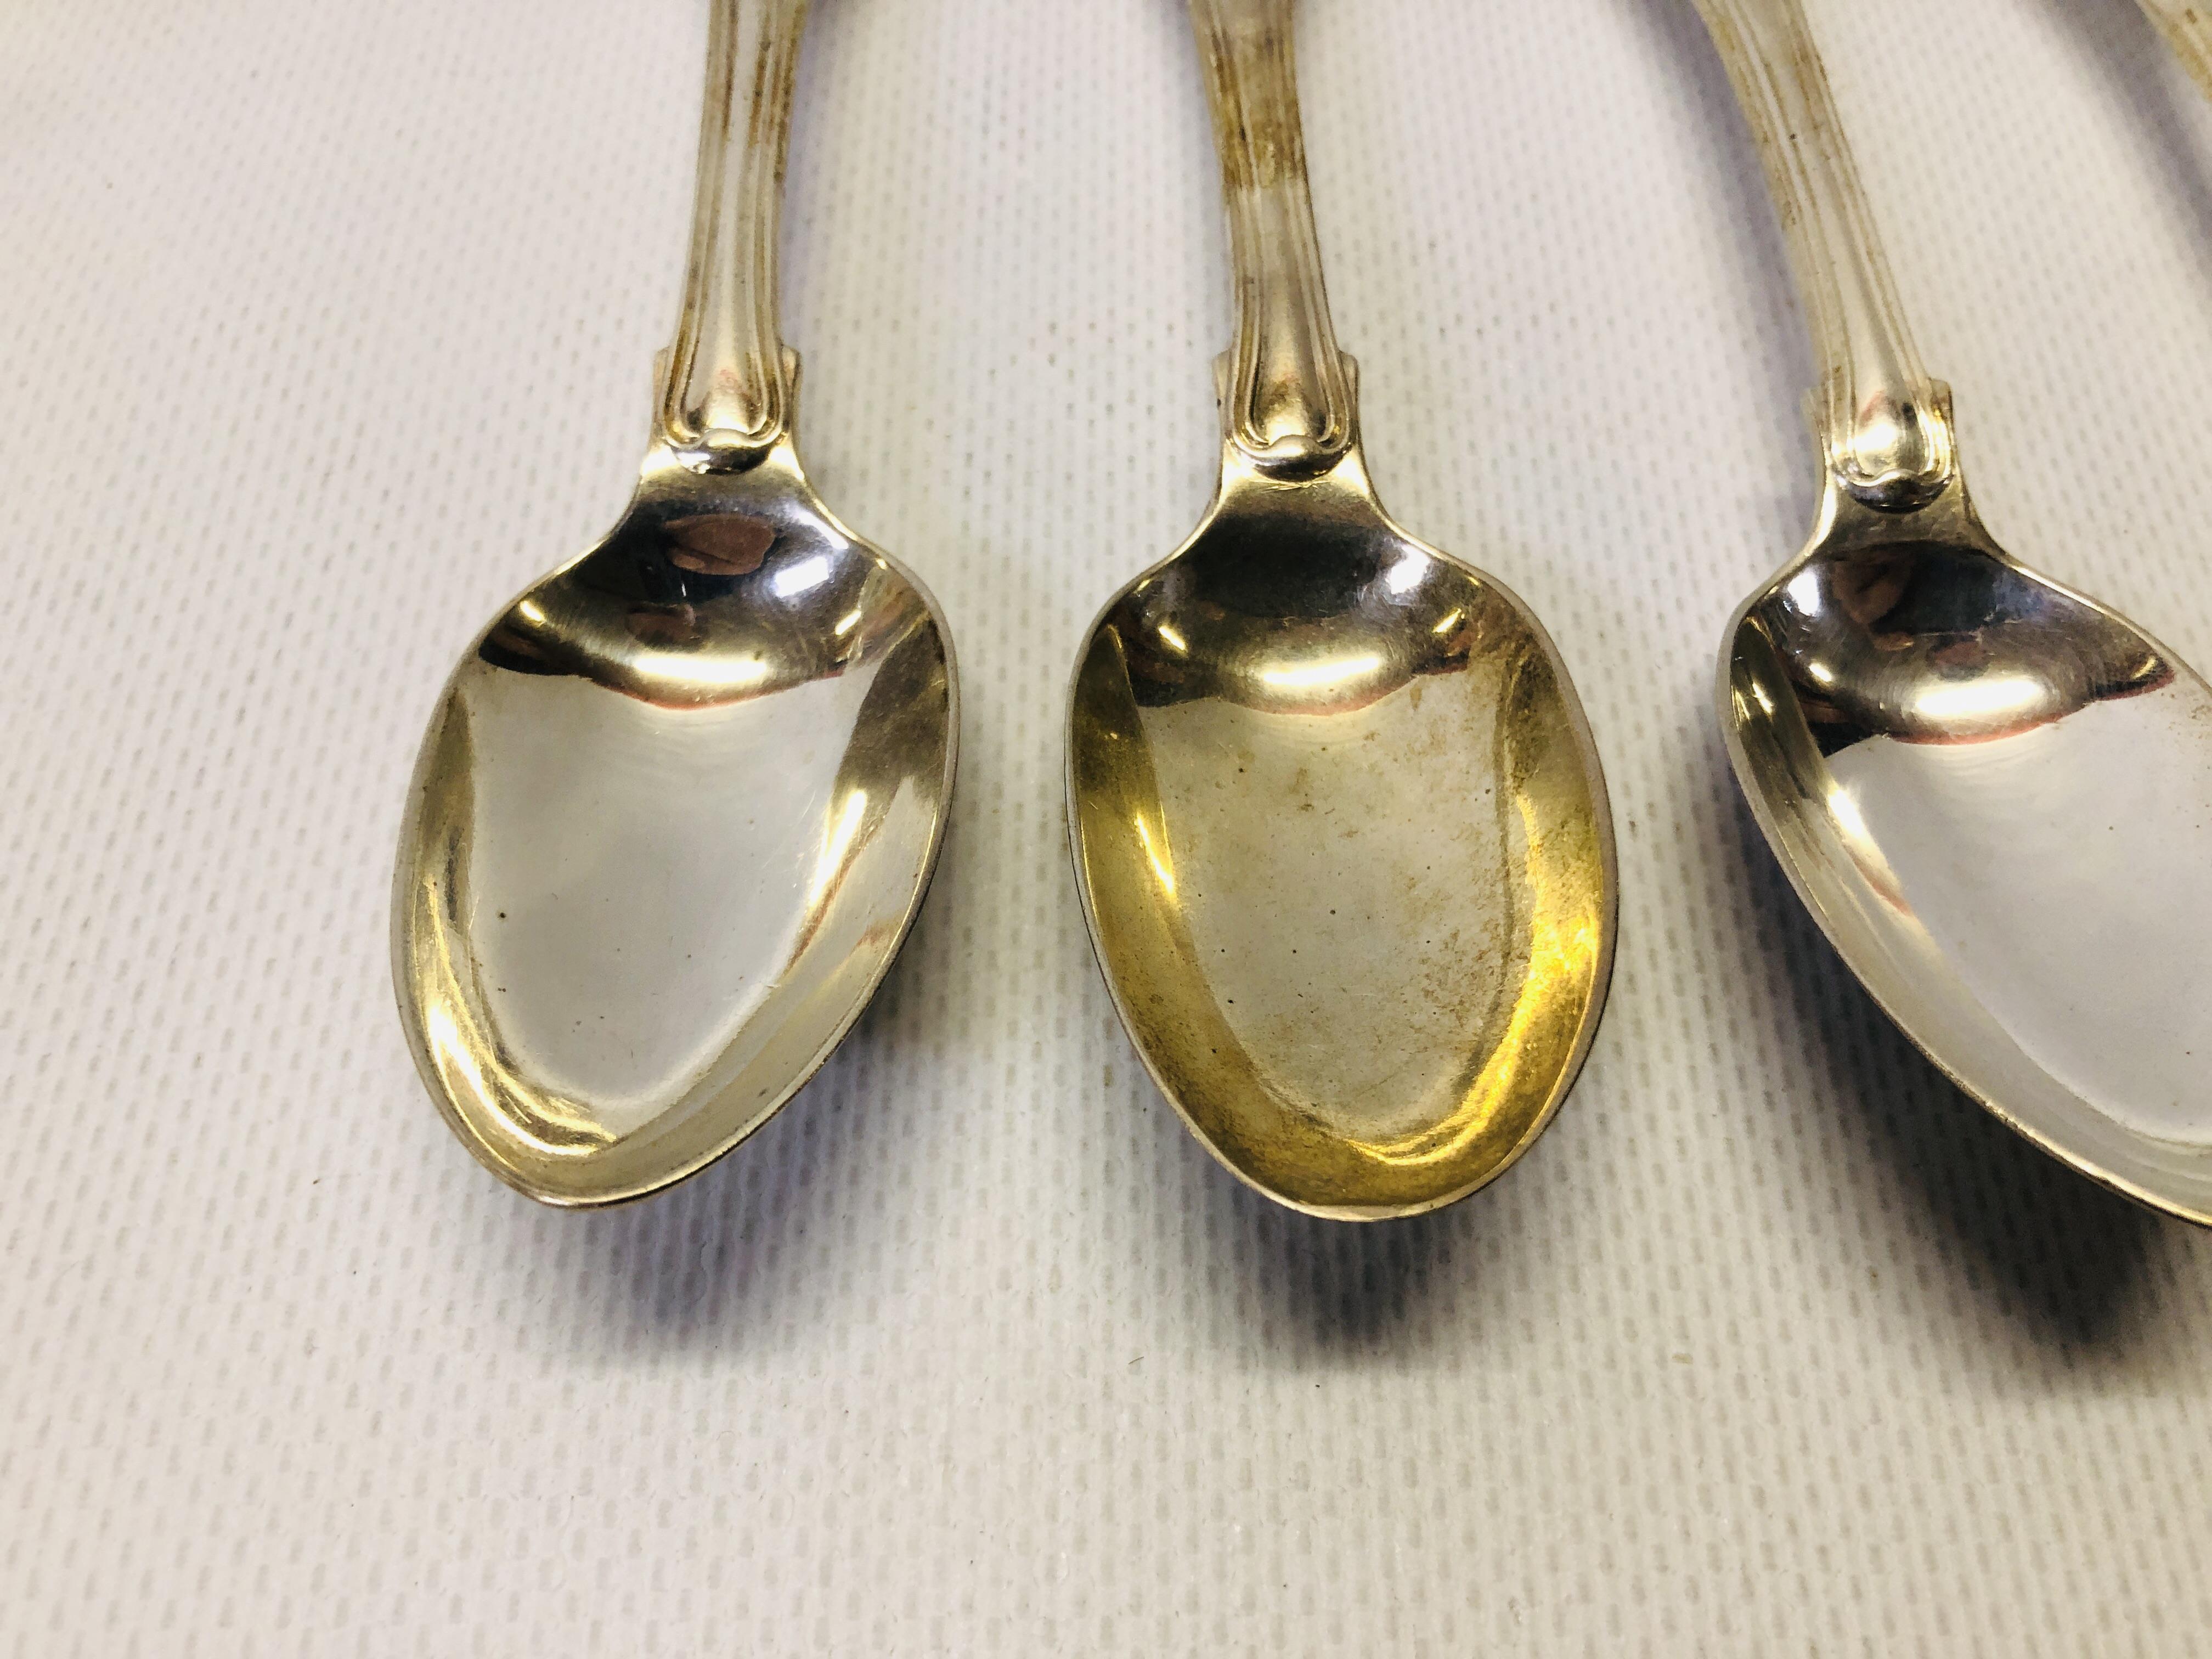 4 WILLIAM IV LARGE KING'S PATTERN SILVER TEASPOONS, W. - Image 3 of 12